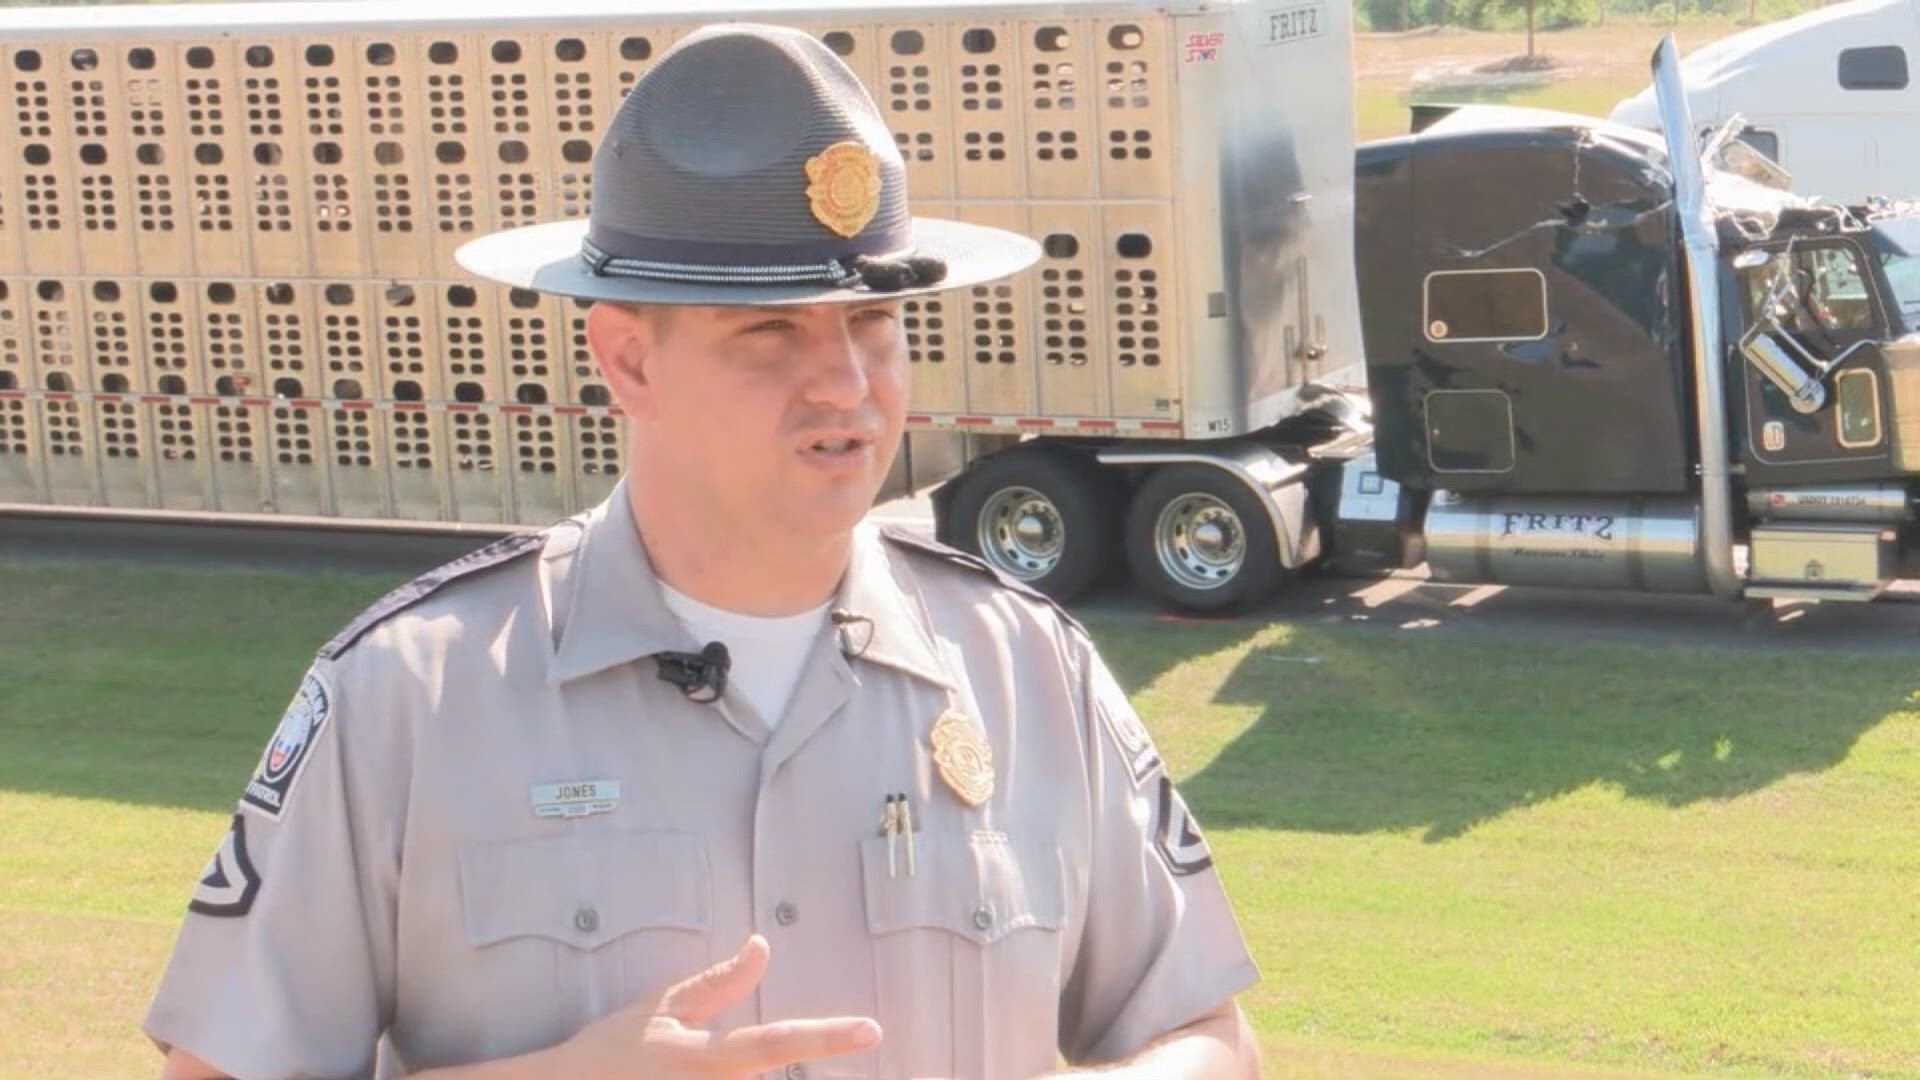 Here's what Trooper Jones told us about the fatal accident that has closed  I-77 South for hours on Wednesday.